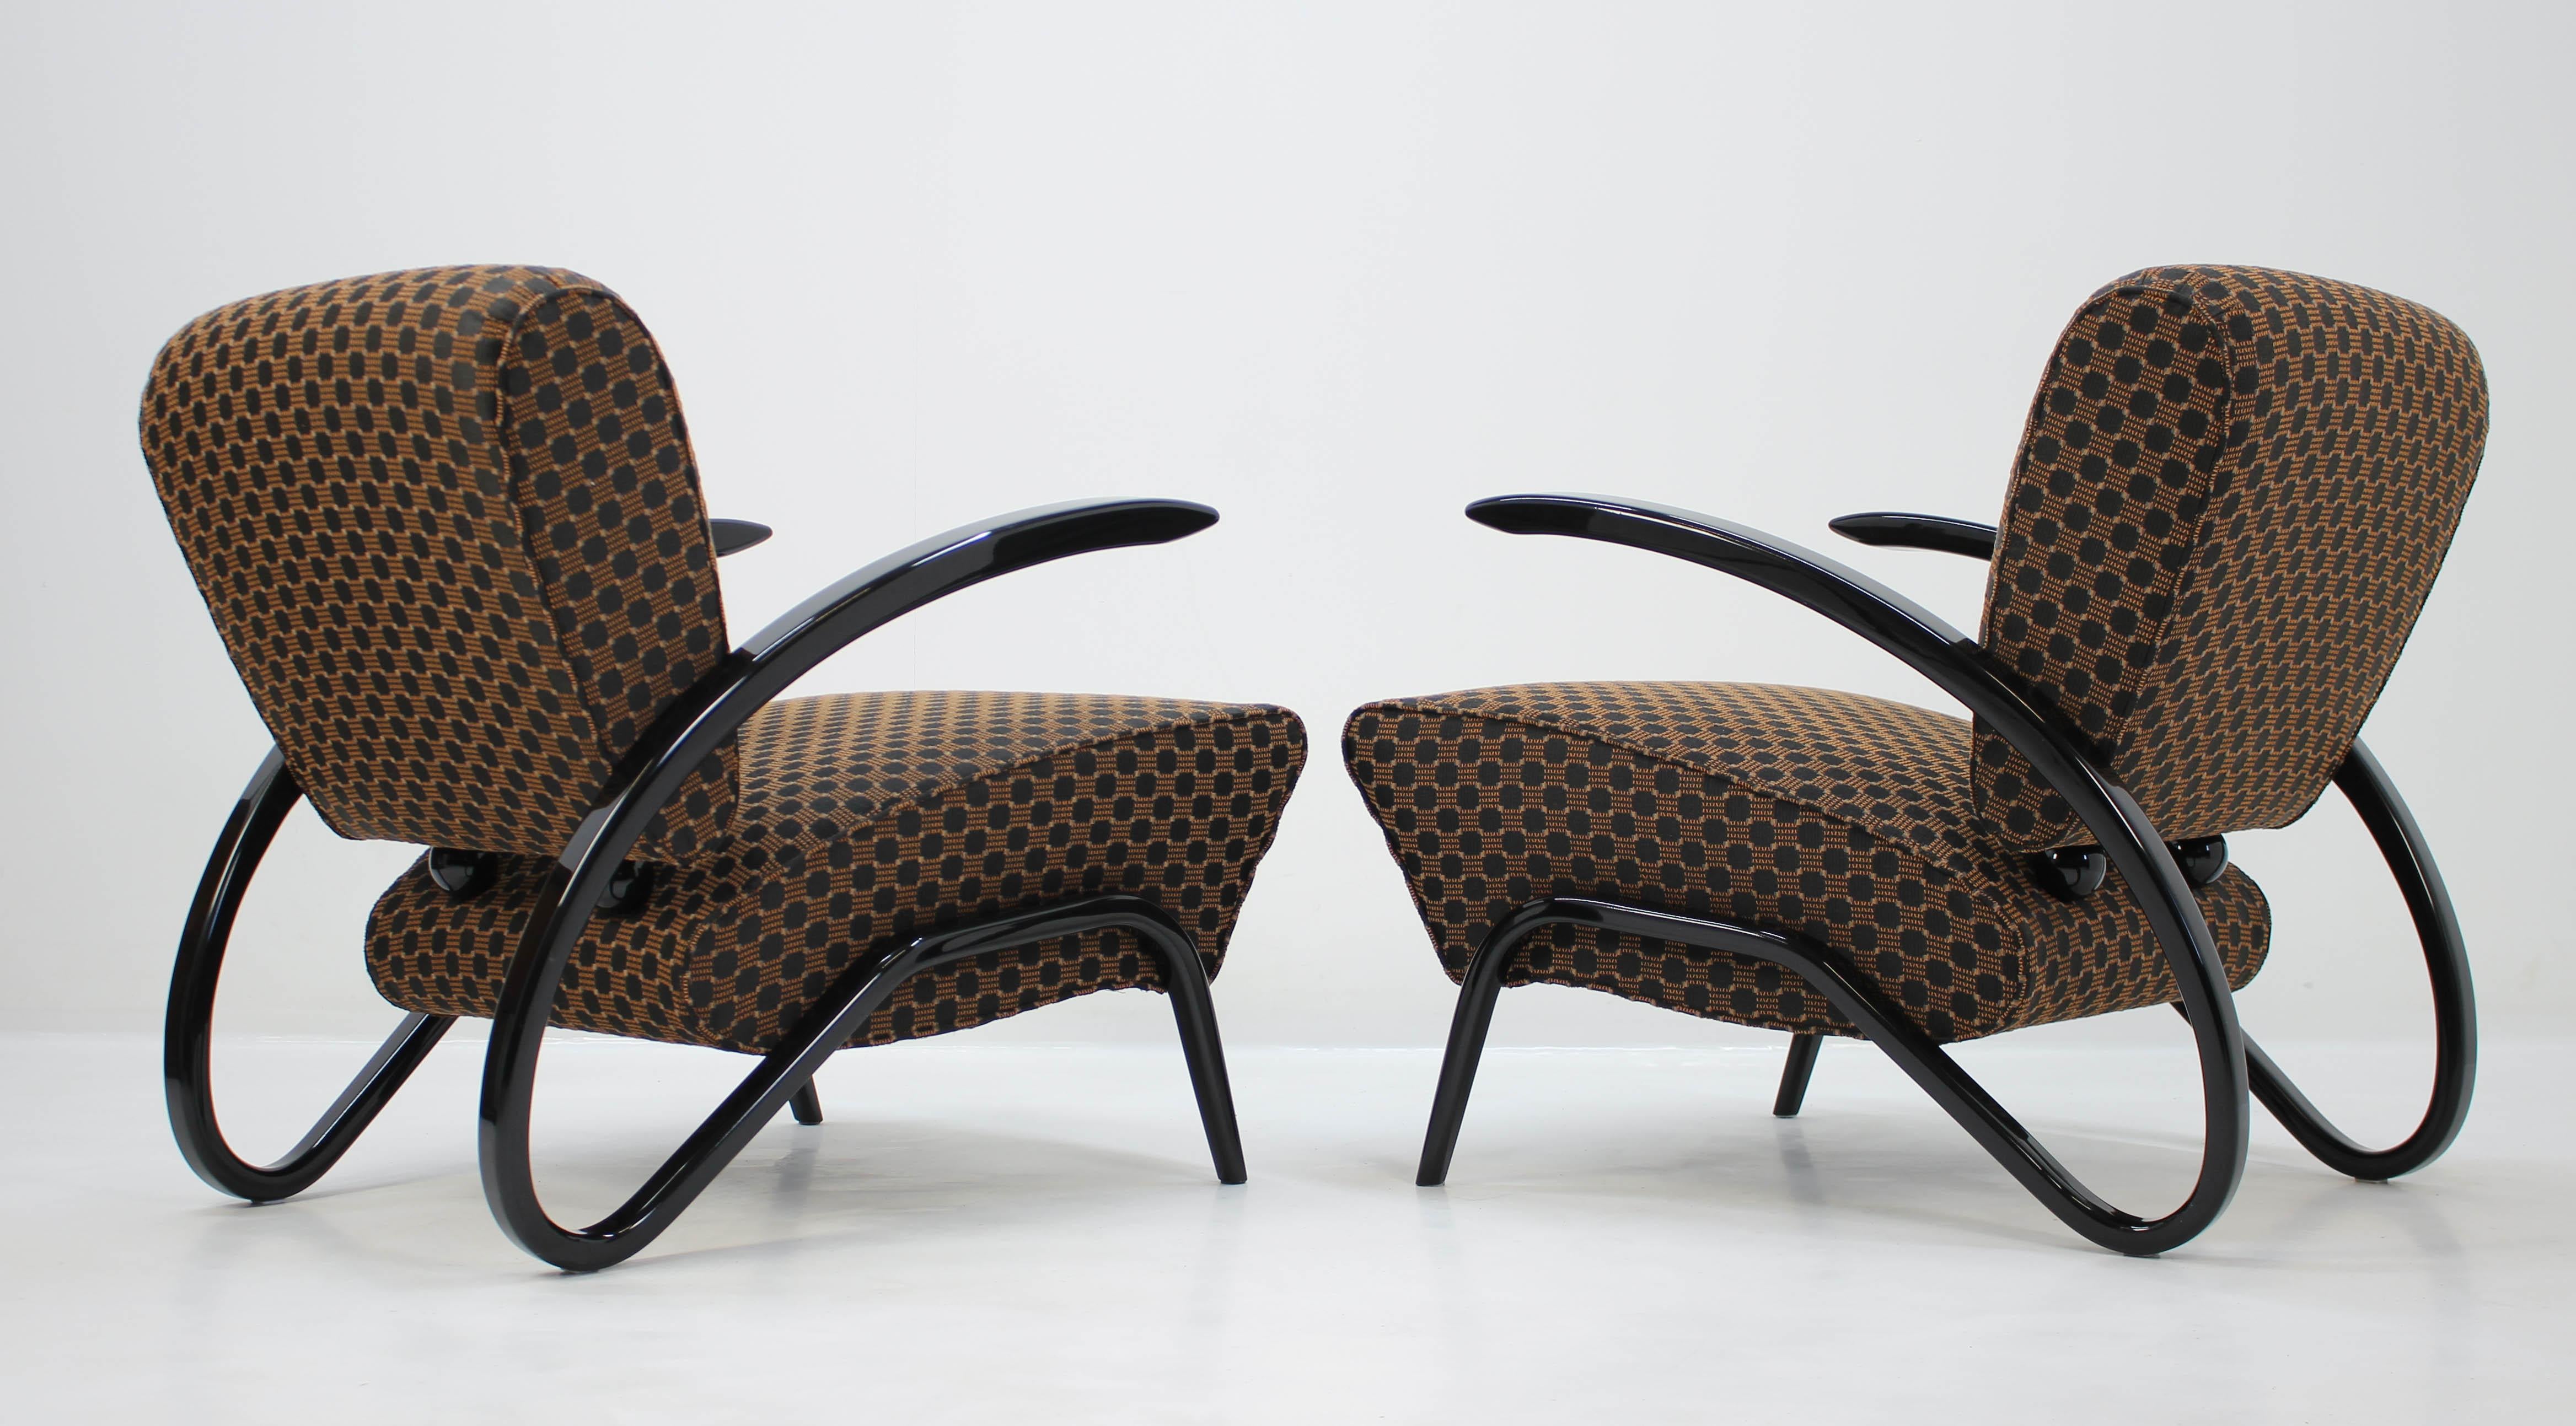 Ultra rare Art Deco armchairs. This is a timeless design and probably one of the very best from renowned Czech designer Jindrich Halabala; made in 1930s. The production was so complicated that it was stopped after only a short period of time. These